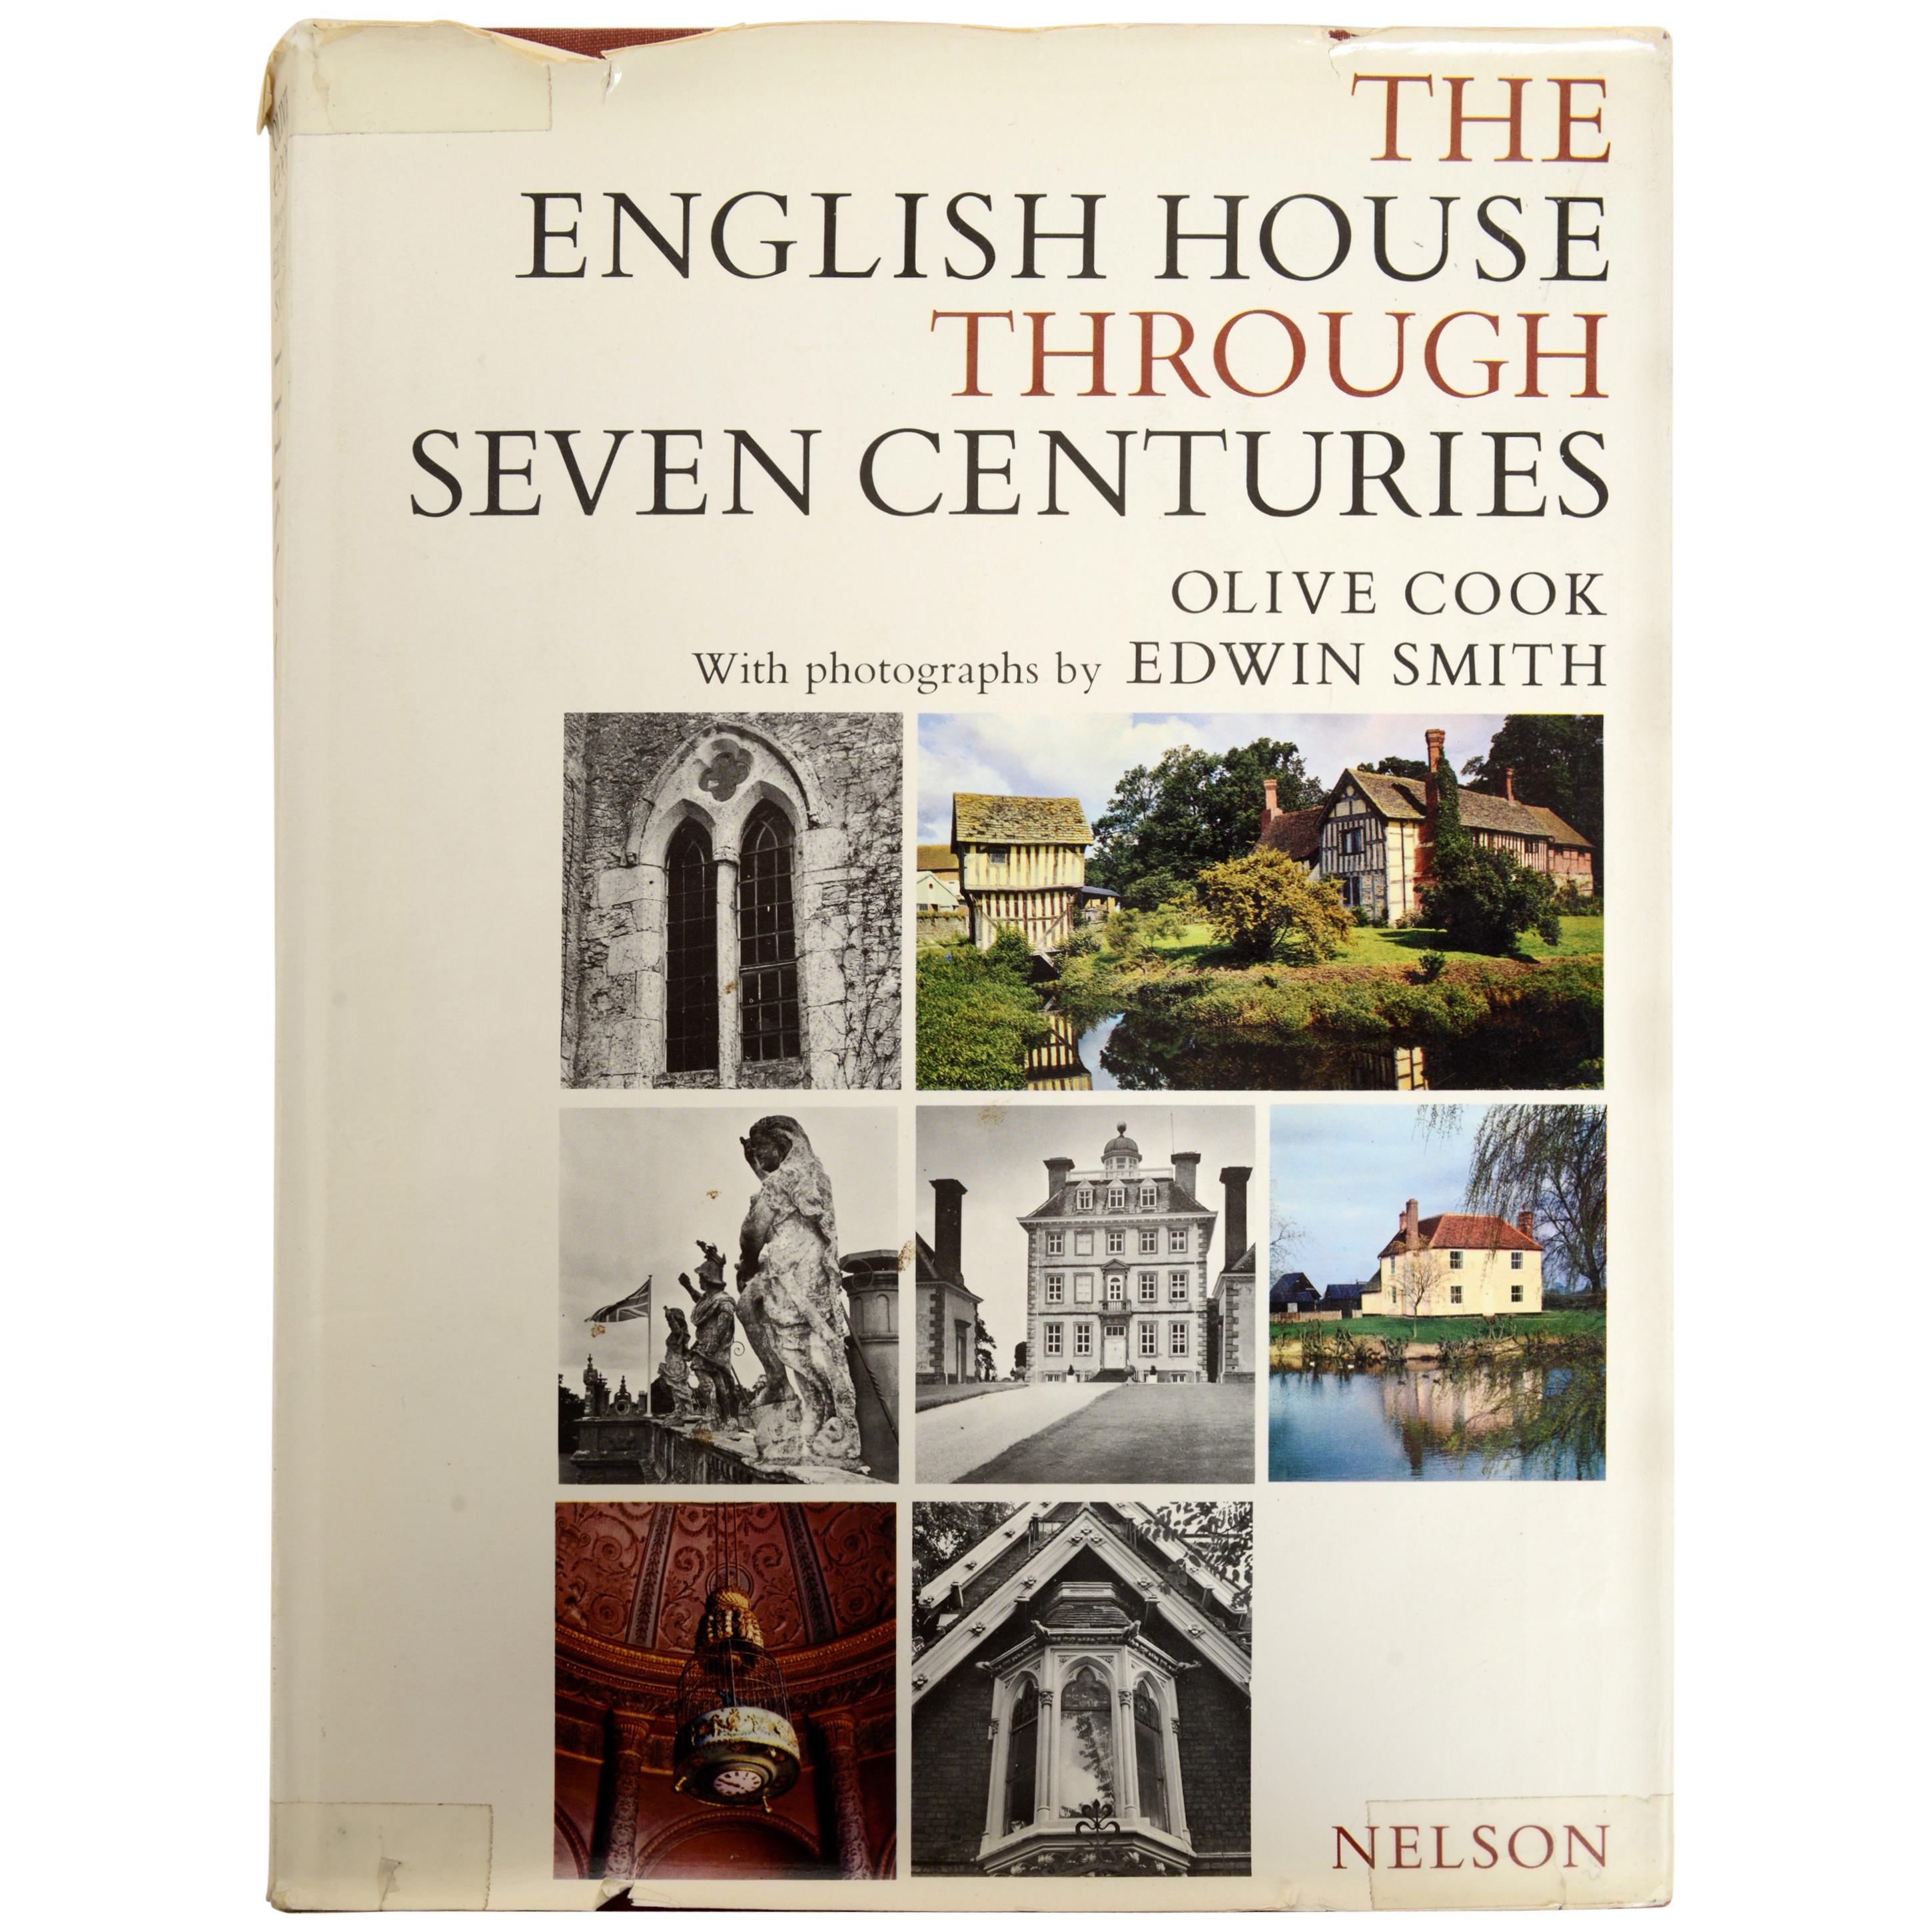 The English House Through Seven Centuries by Olive Cook, First Edition